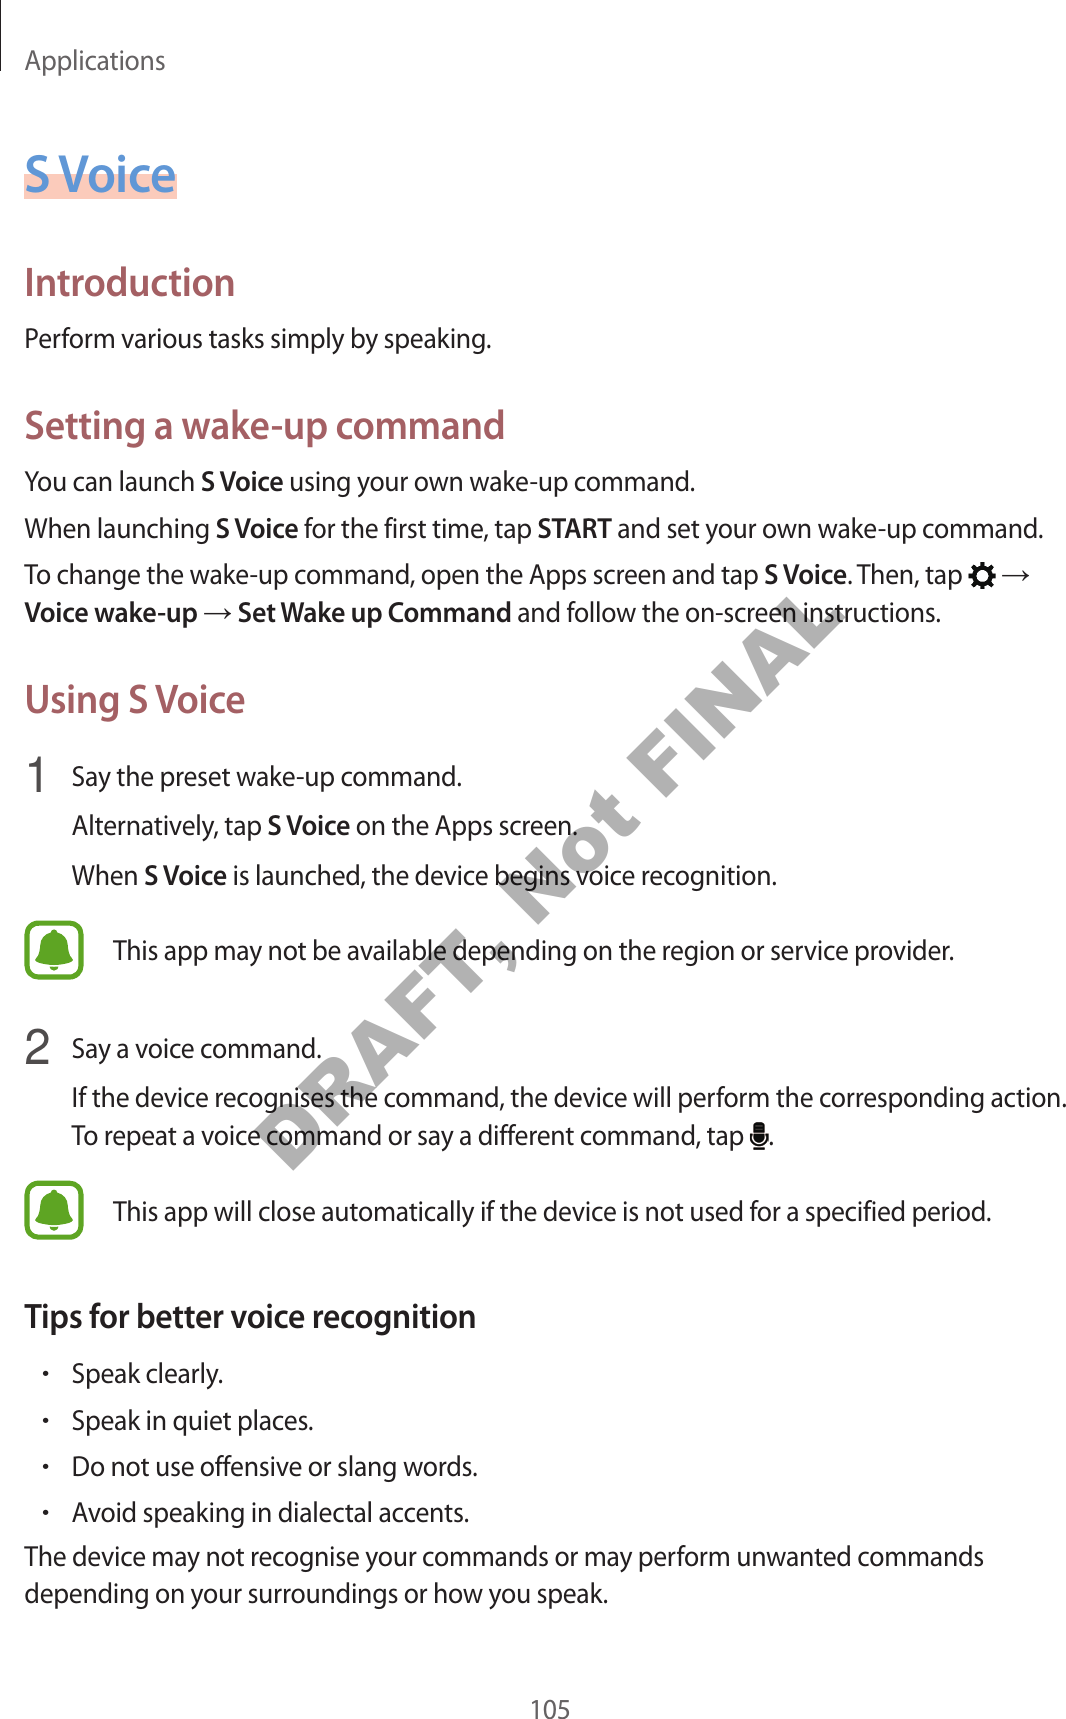 Applications105S V oiceIntroductionP erform various tasks simply by speaking.Setting a wake-up commandYou can launch S V oice using your own w ake-up command.When launching S V oice for the first time , tap START and set your own w ake-up command.To change the wake-up command, open the A pps scr een and tap S V oice. Then, tap    Voice wak e-up  Set Wake up Command and follo w the on-scr een instructions.Using S Voice1  Say the preset w ake-up command .Alternativ ely, tap S V oice on the Apps screen.When S V oice is launched, the device beg ins v oic e r ecog nition.This app may not be a vailable depending on the r eg ion or service provider.2  Say a voic e command .If the device recog nises the command , the devic e will perform the c orresponding action. To repeat a v oic e command or sa y a diff er en t command , tap  .This app will close automatically if the devic e is not used f or a specified period .T ips f or bett er v oic e r ec ognition•Speak clearly.•Speak in quiet places.•Do not use offensiv e or slang w or ds .•A v oid speaking in dialectal accen ts .The device ma y not r ecog nise y our c ommands or may perform unwant ed c ommands depending on your surroundings or ho w y ou speak.DRAFT, Not FINAL